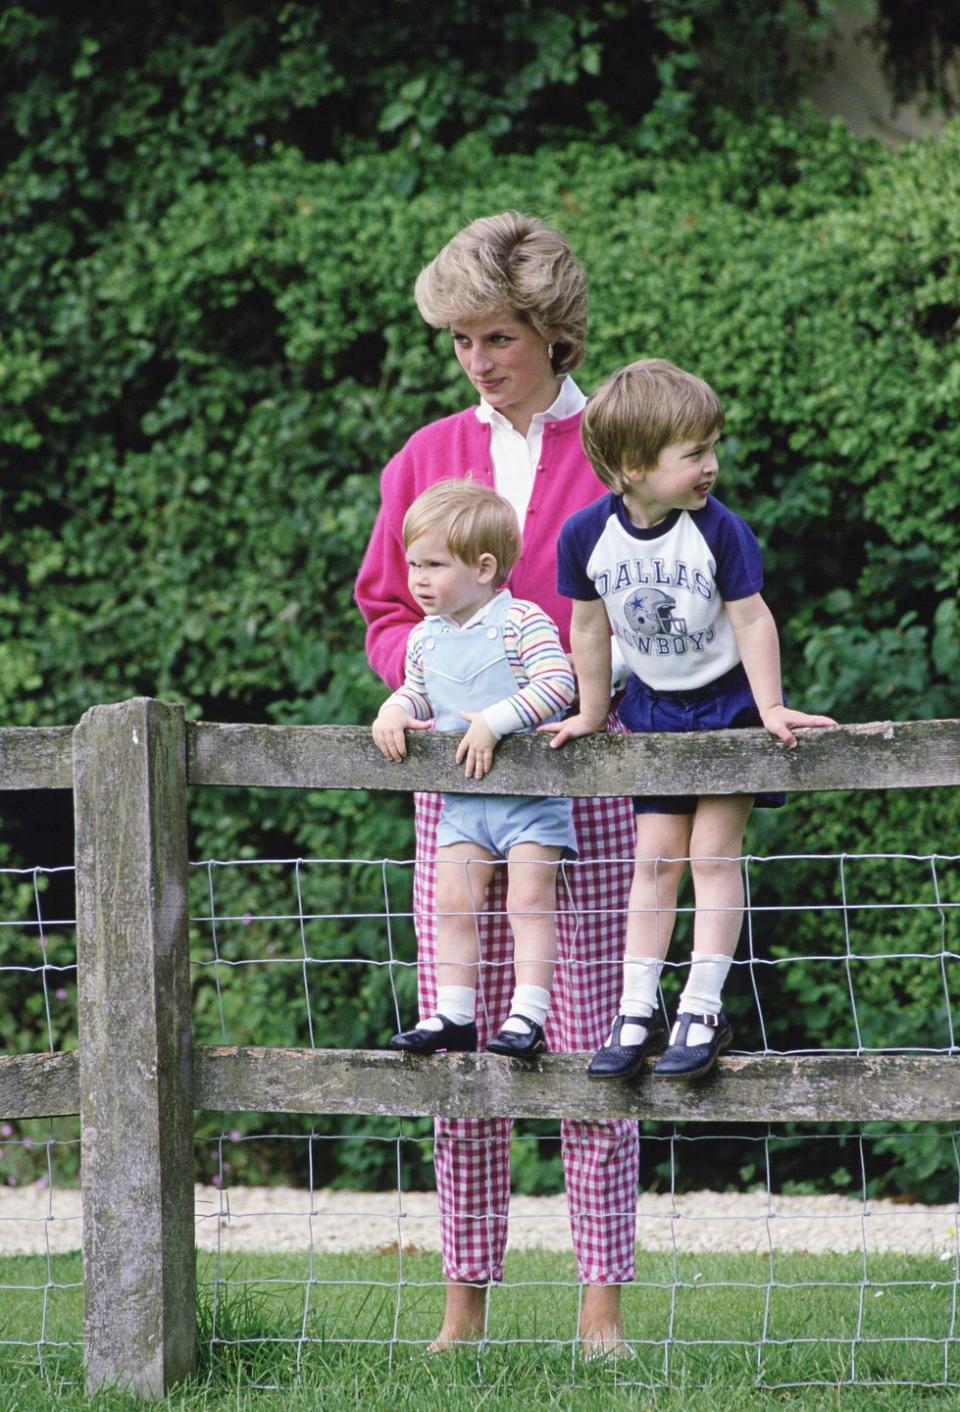 Princess Diana With Harry And William Outdoors